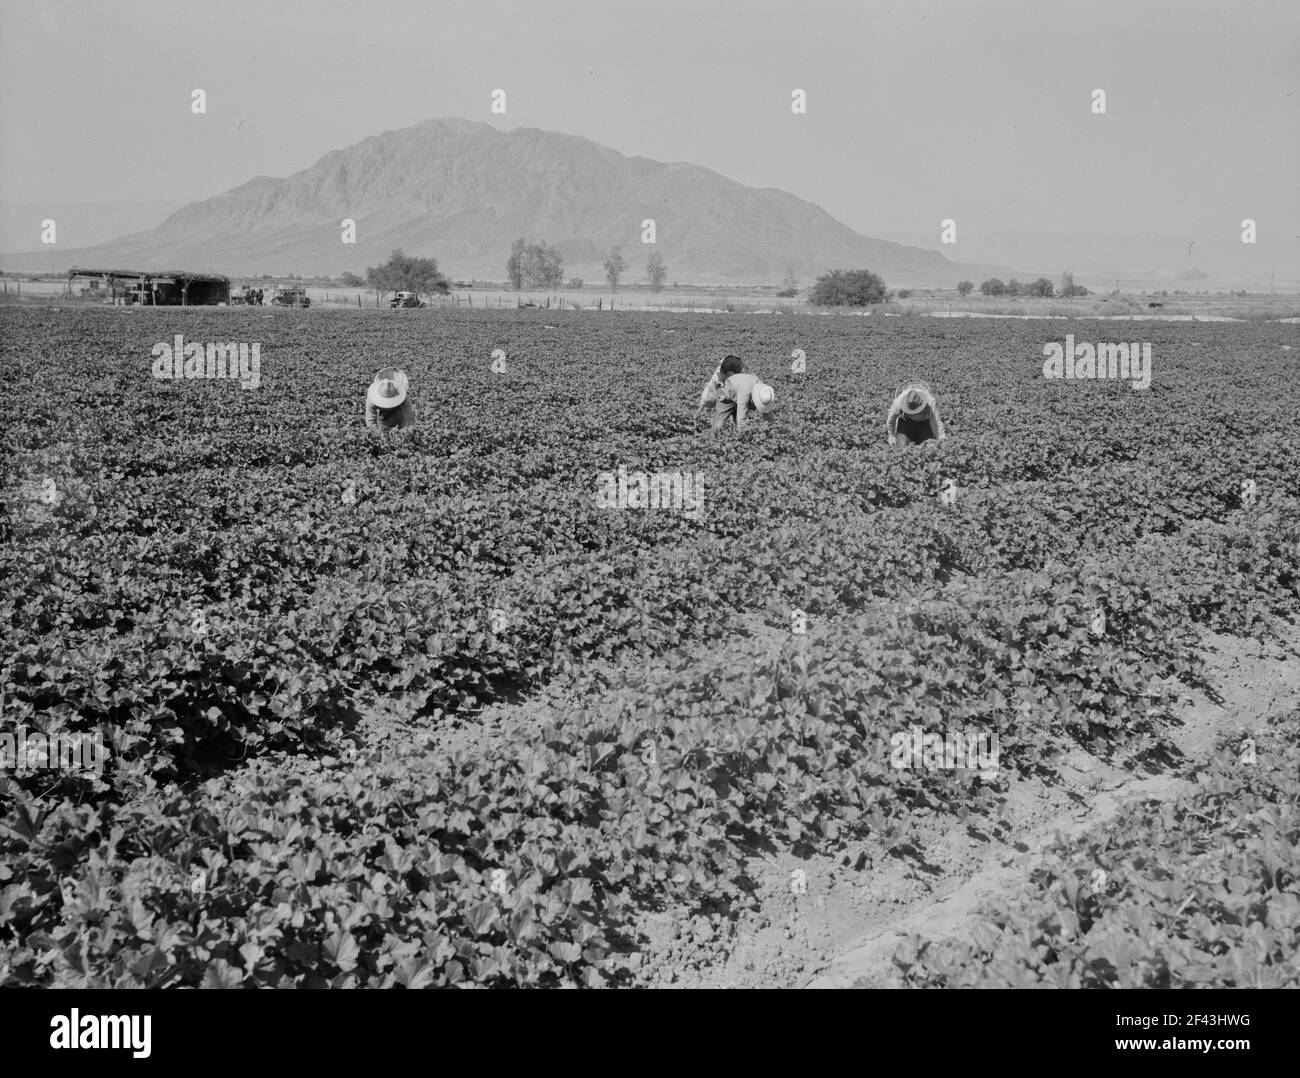 Mexicans picking cantaloupes one mile north of the Mexican border. Imperial Valley, Califoria. 6:00 a.m. This is highly skilled labor. May 1937. Photograph by Dorothea Lange. Stock Photo